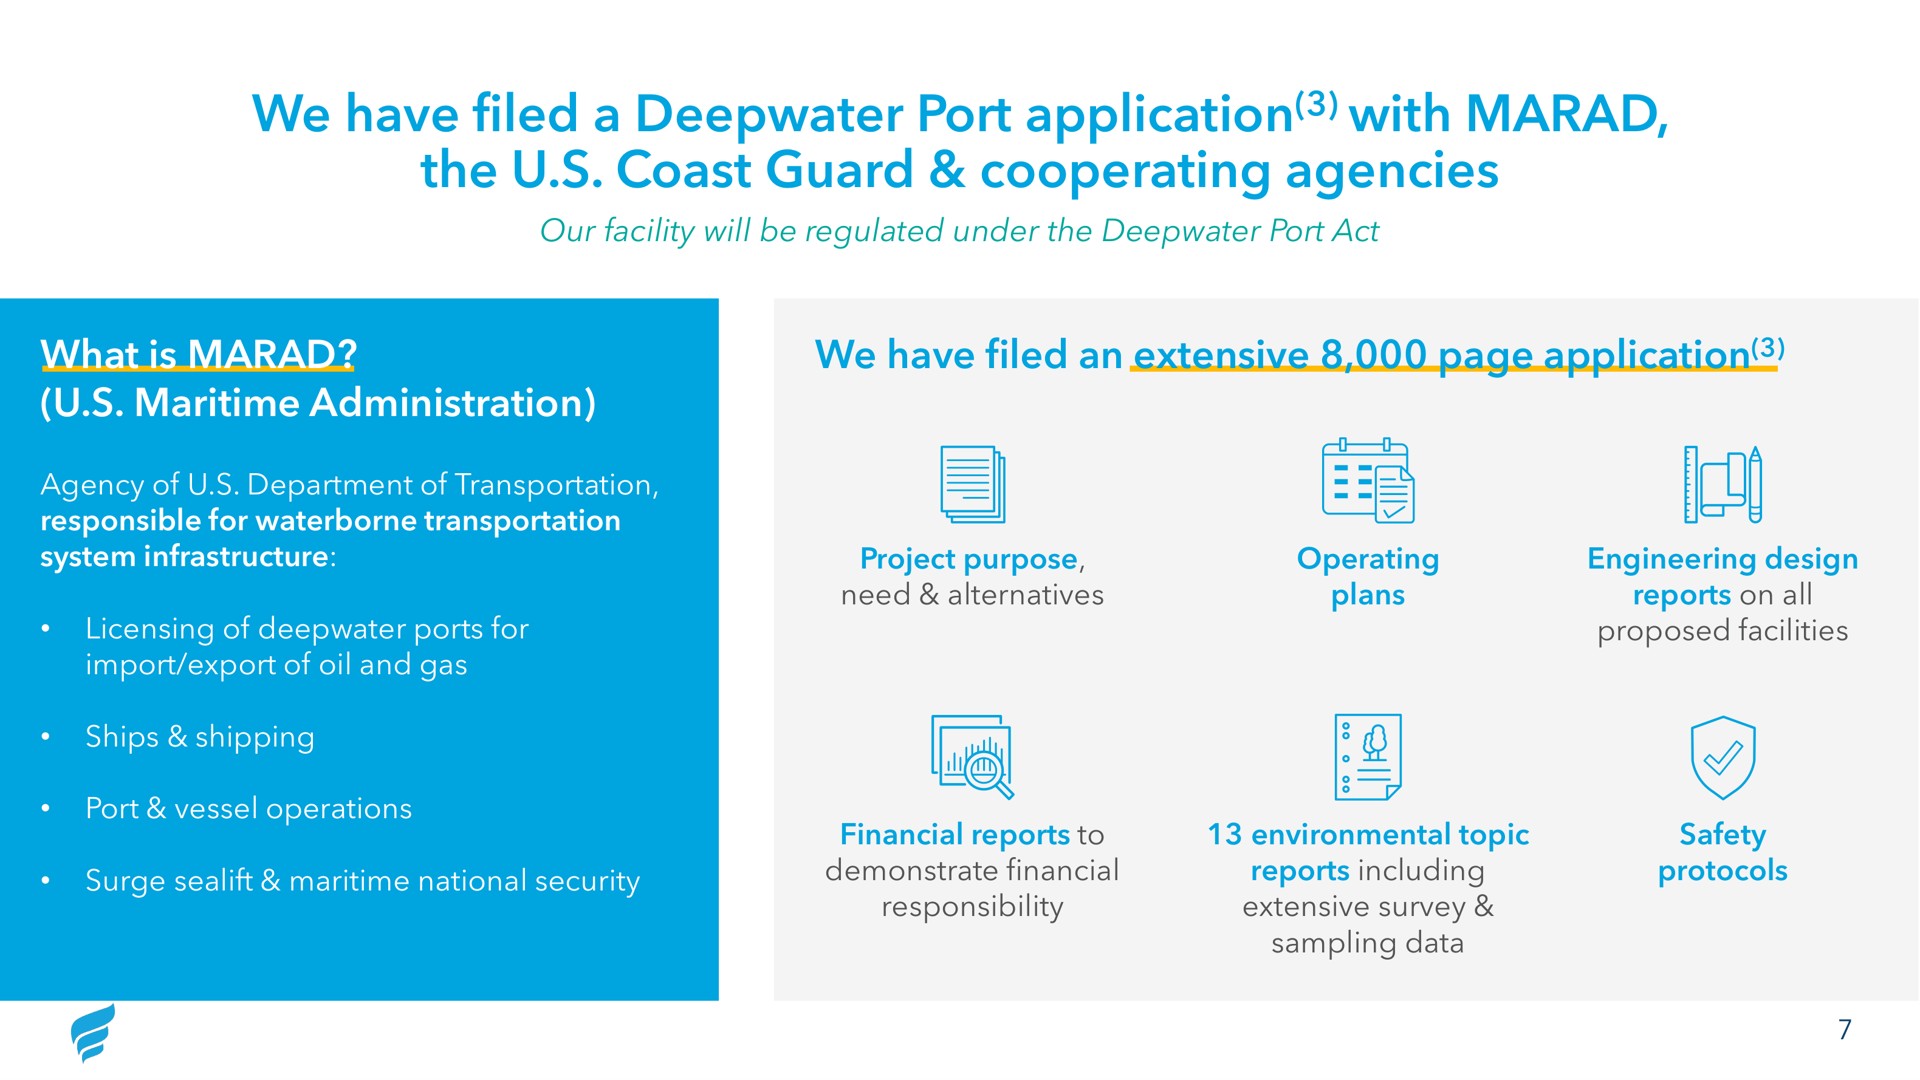 we have filed a deepwater port application with the coast guard agencies | NewFortress Energy